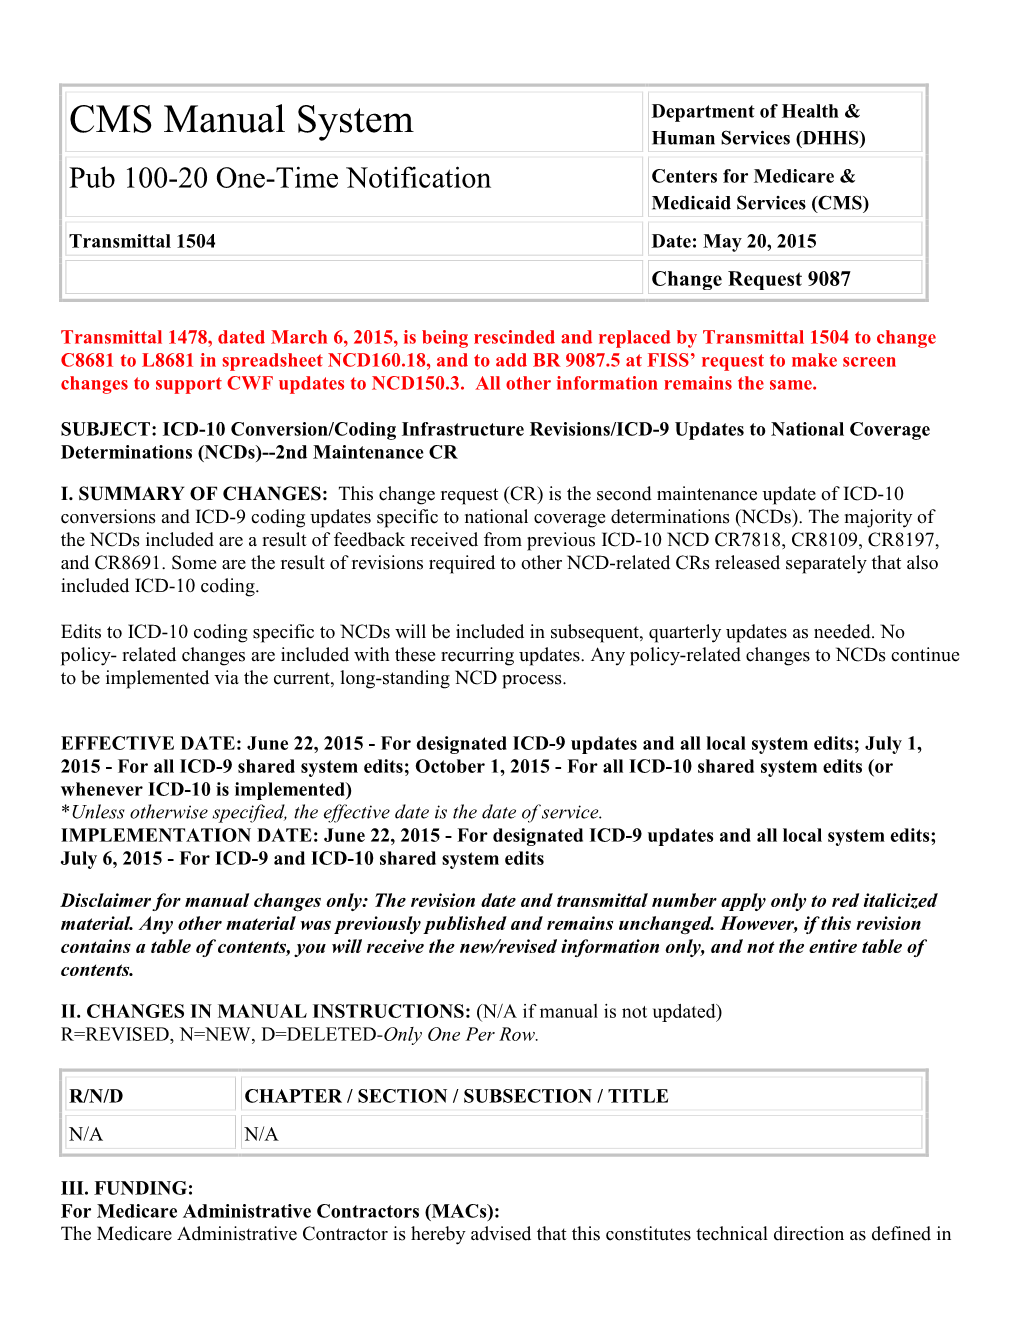 Pub 100-20 One-Time Notification Centers for Medicare & Medicaid Services (CMS) Transmittal 1504 Date: May 20, 2015 Change Request 9087